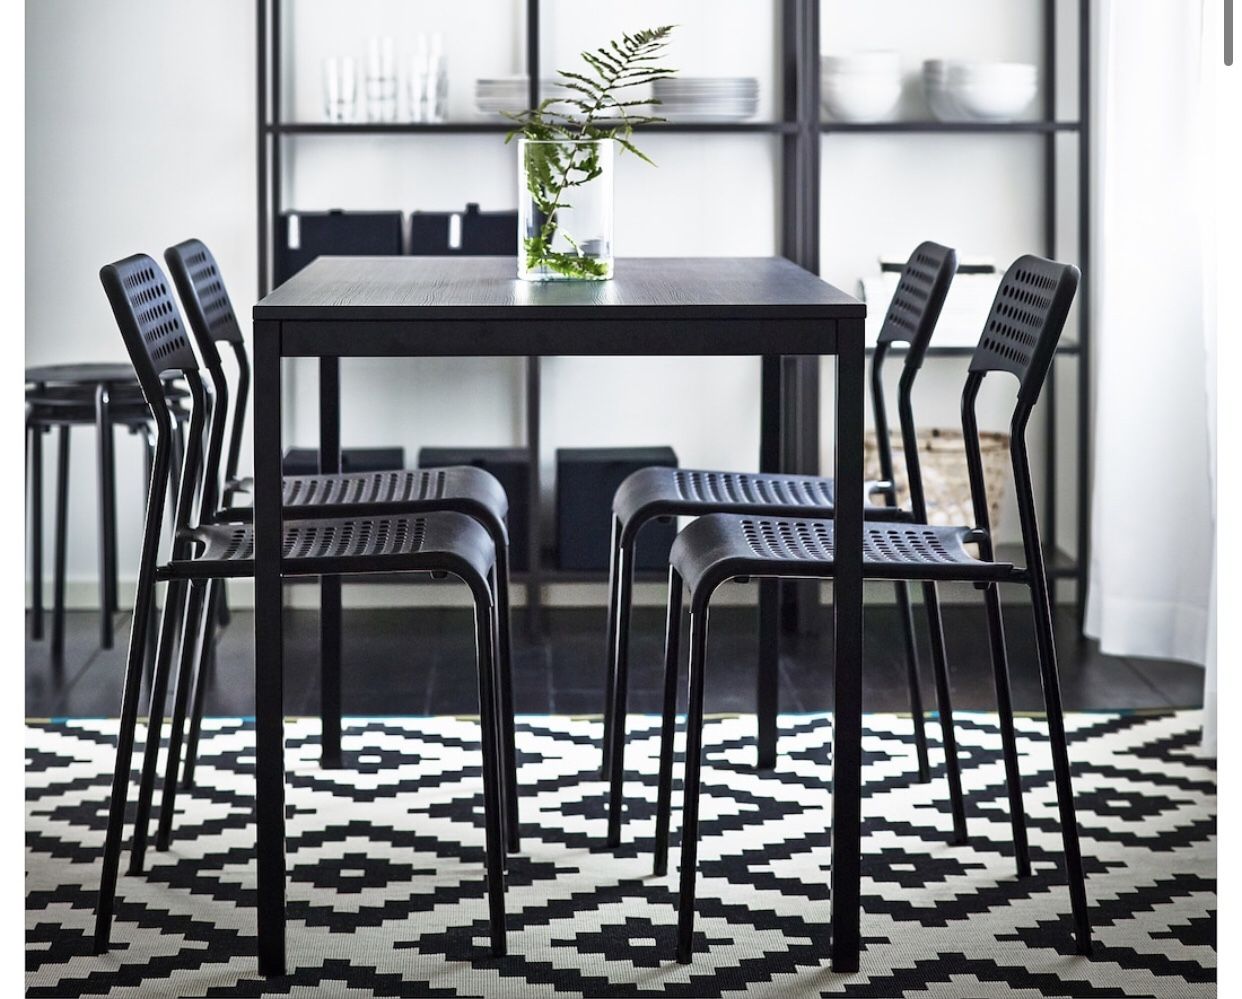 Table, black, 43 1/4x26 3/8 " with 4 chairs